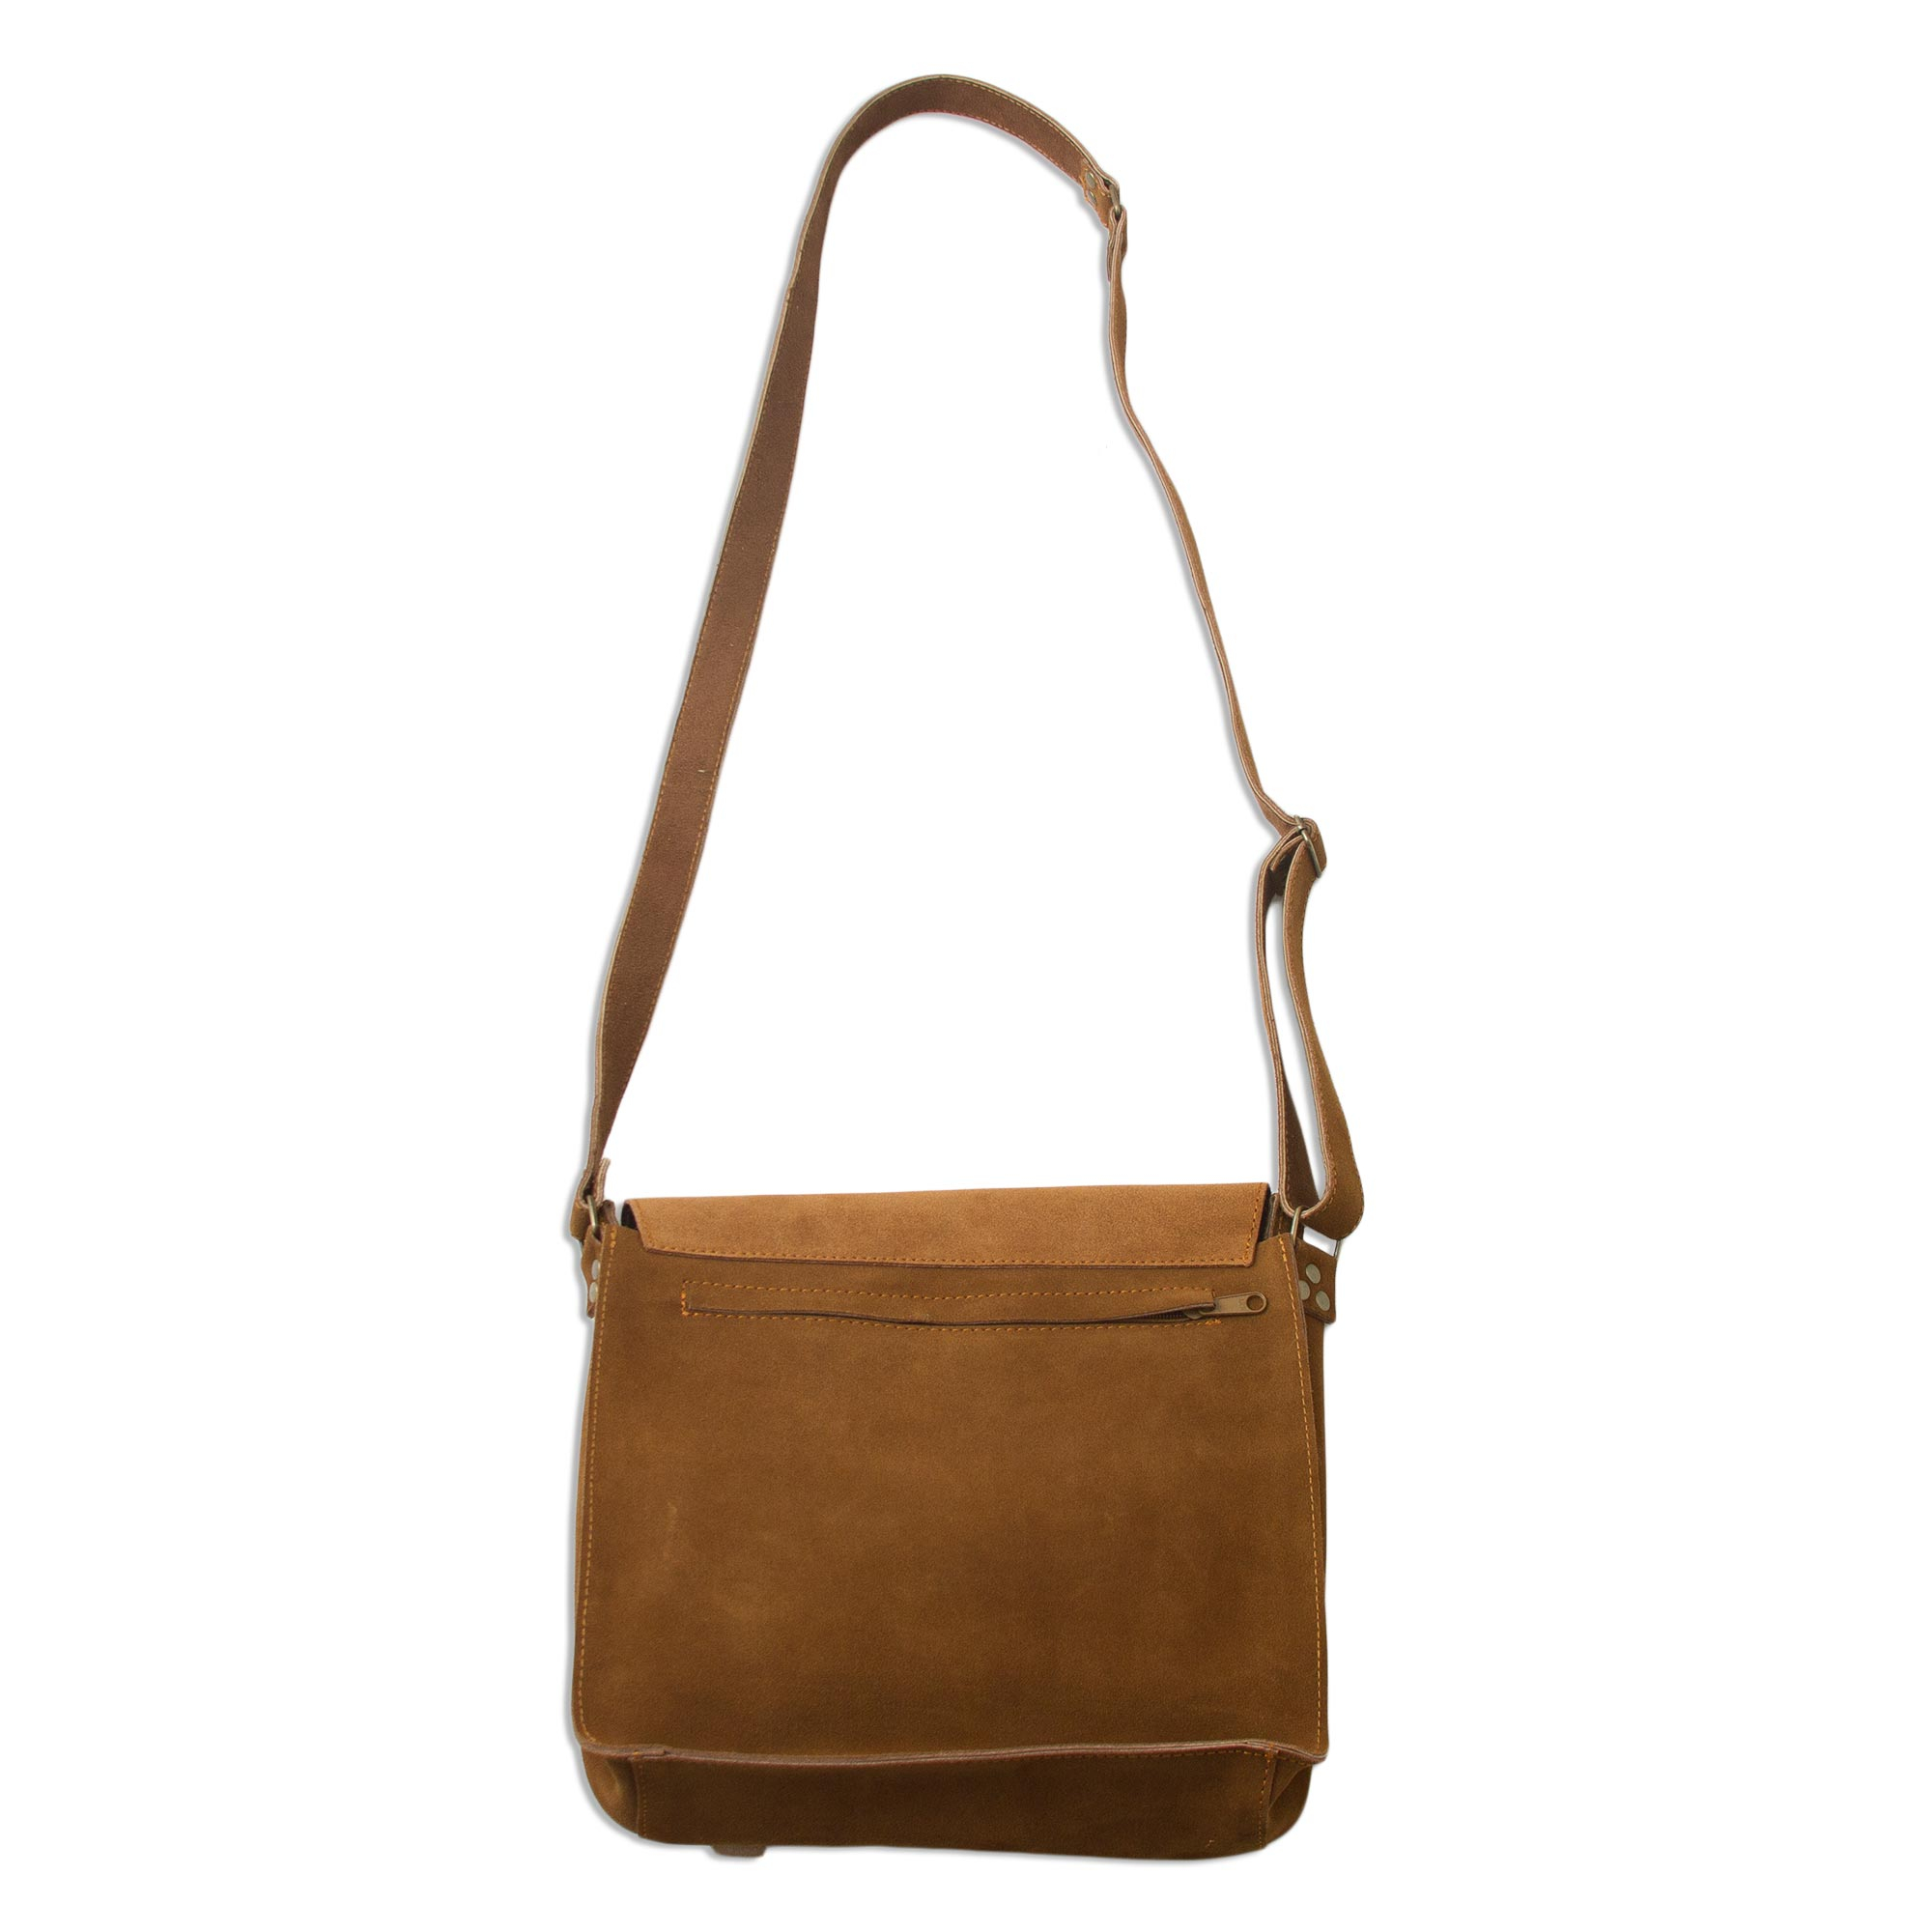 Wool Accented Suede Messenger Bag in Sepia from Peru - Sepia Business ...